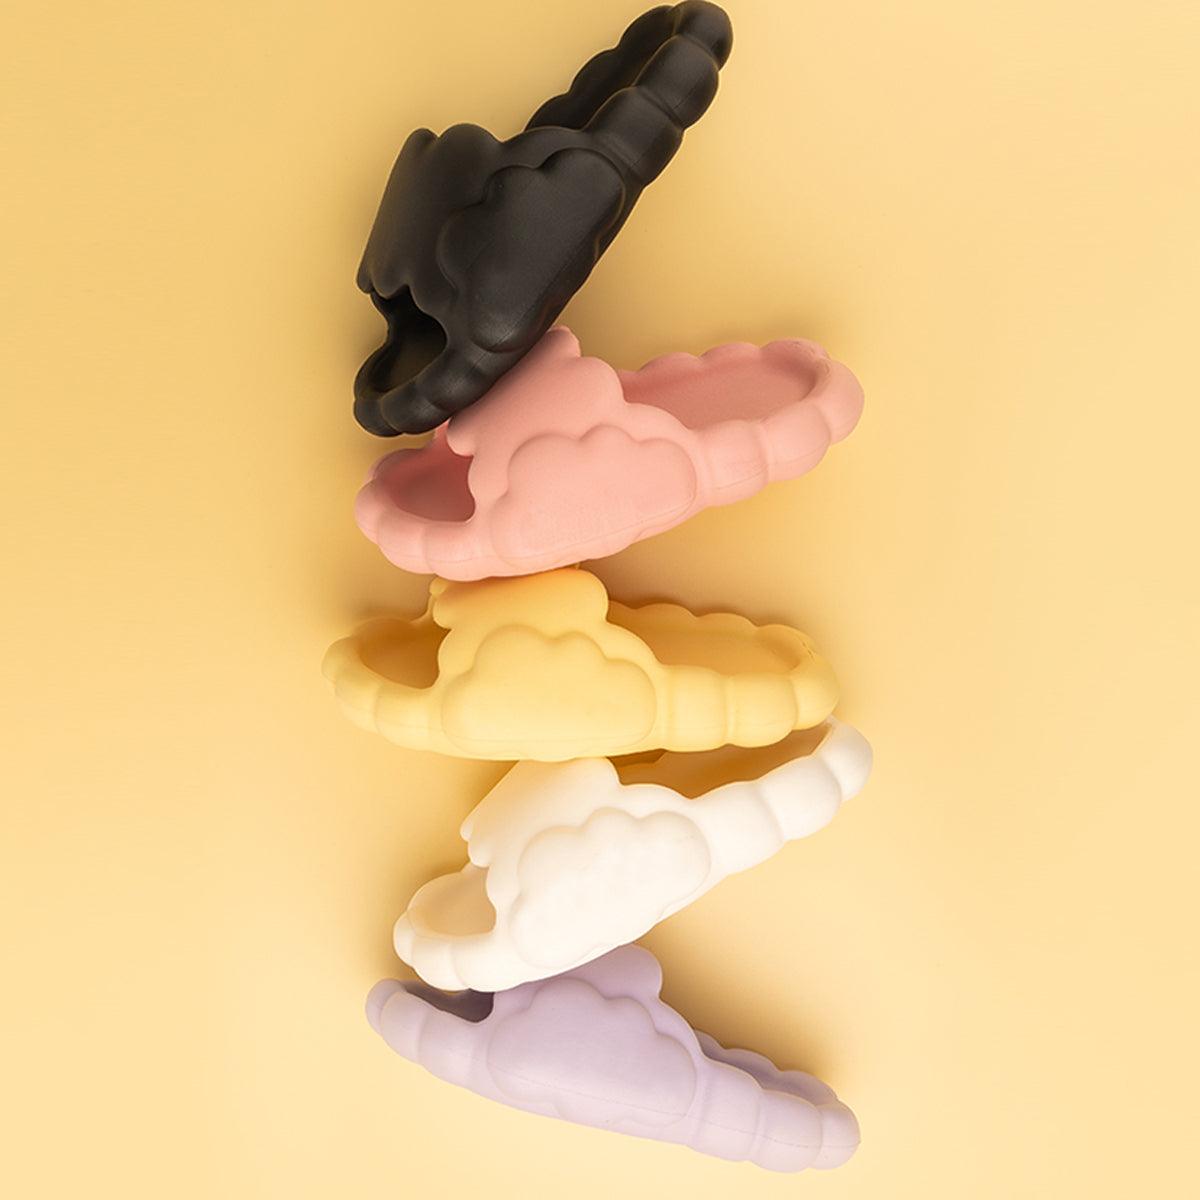 Soft Cloud Aesthetic Slippers - Aesthetic Clothes Shop